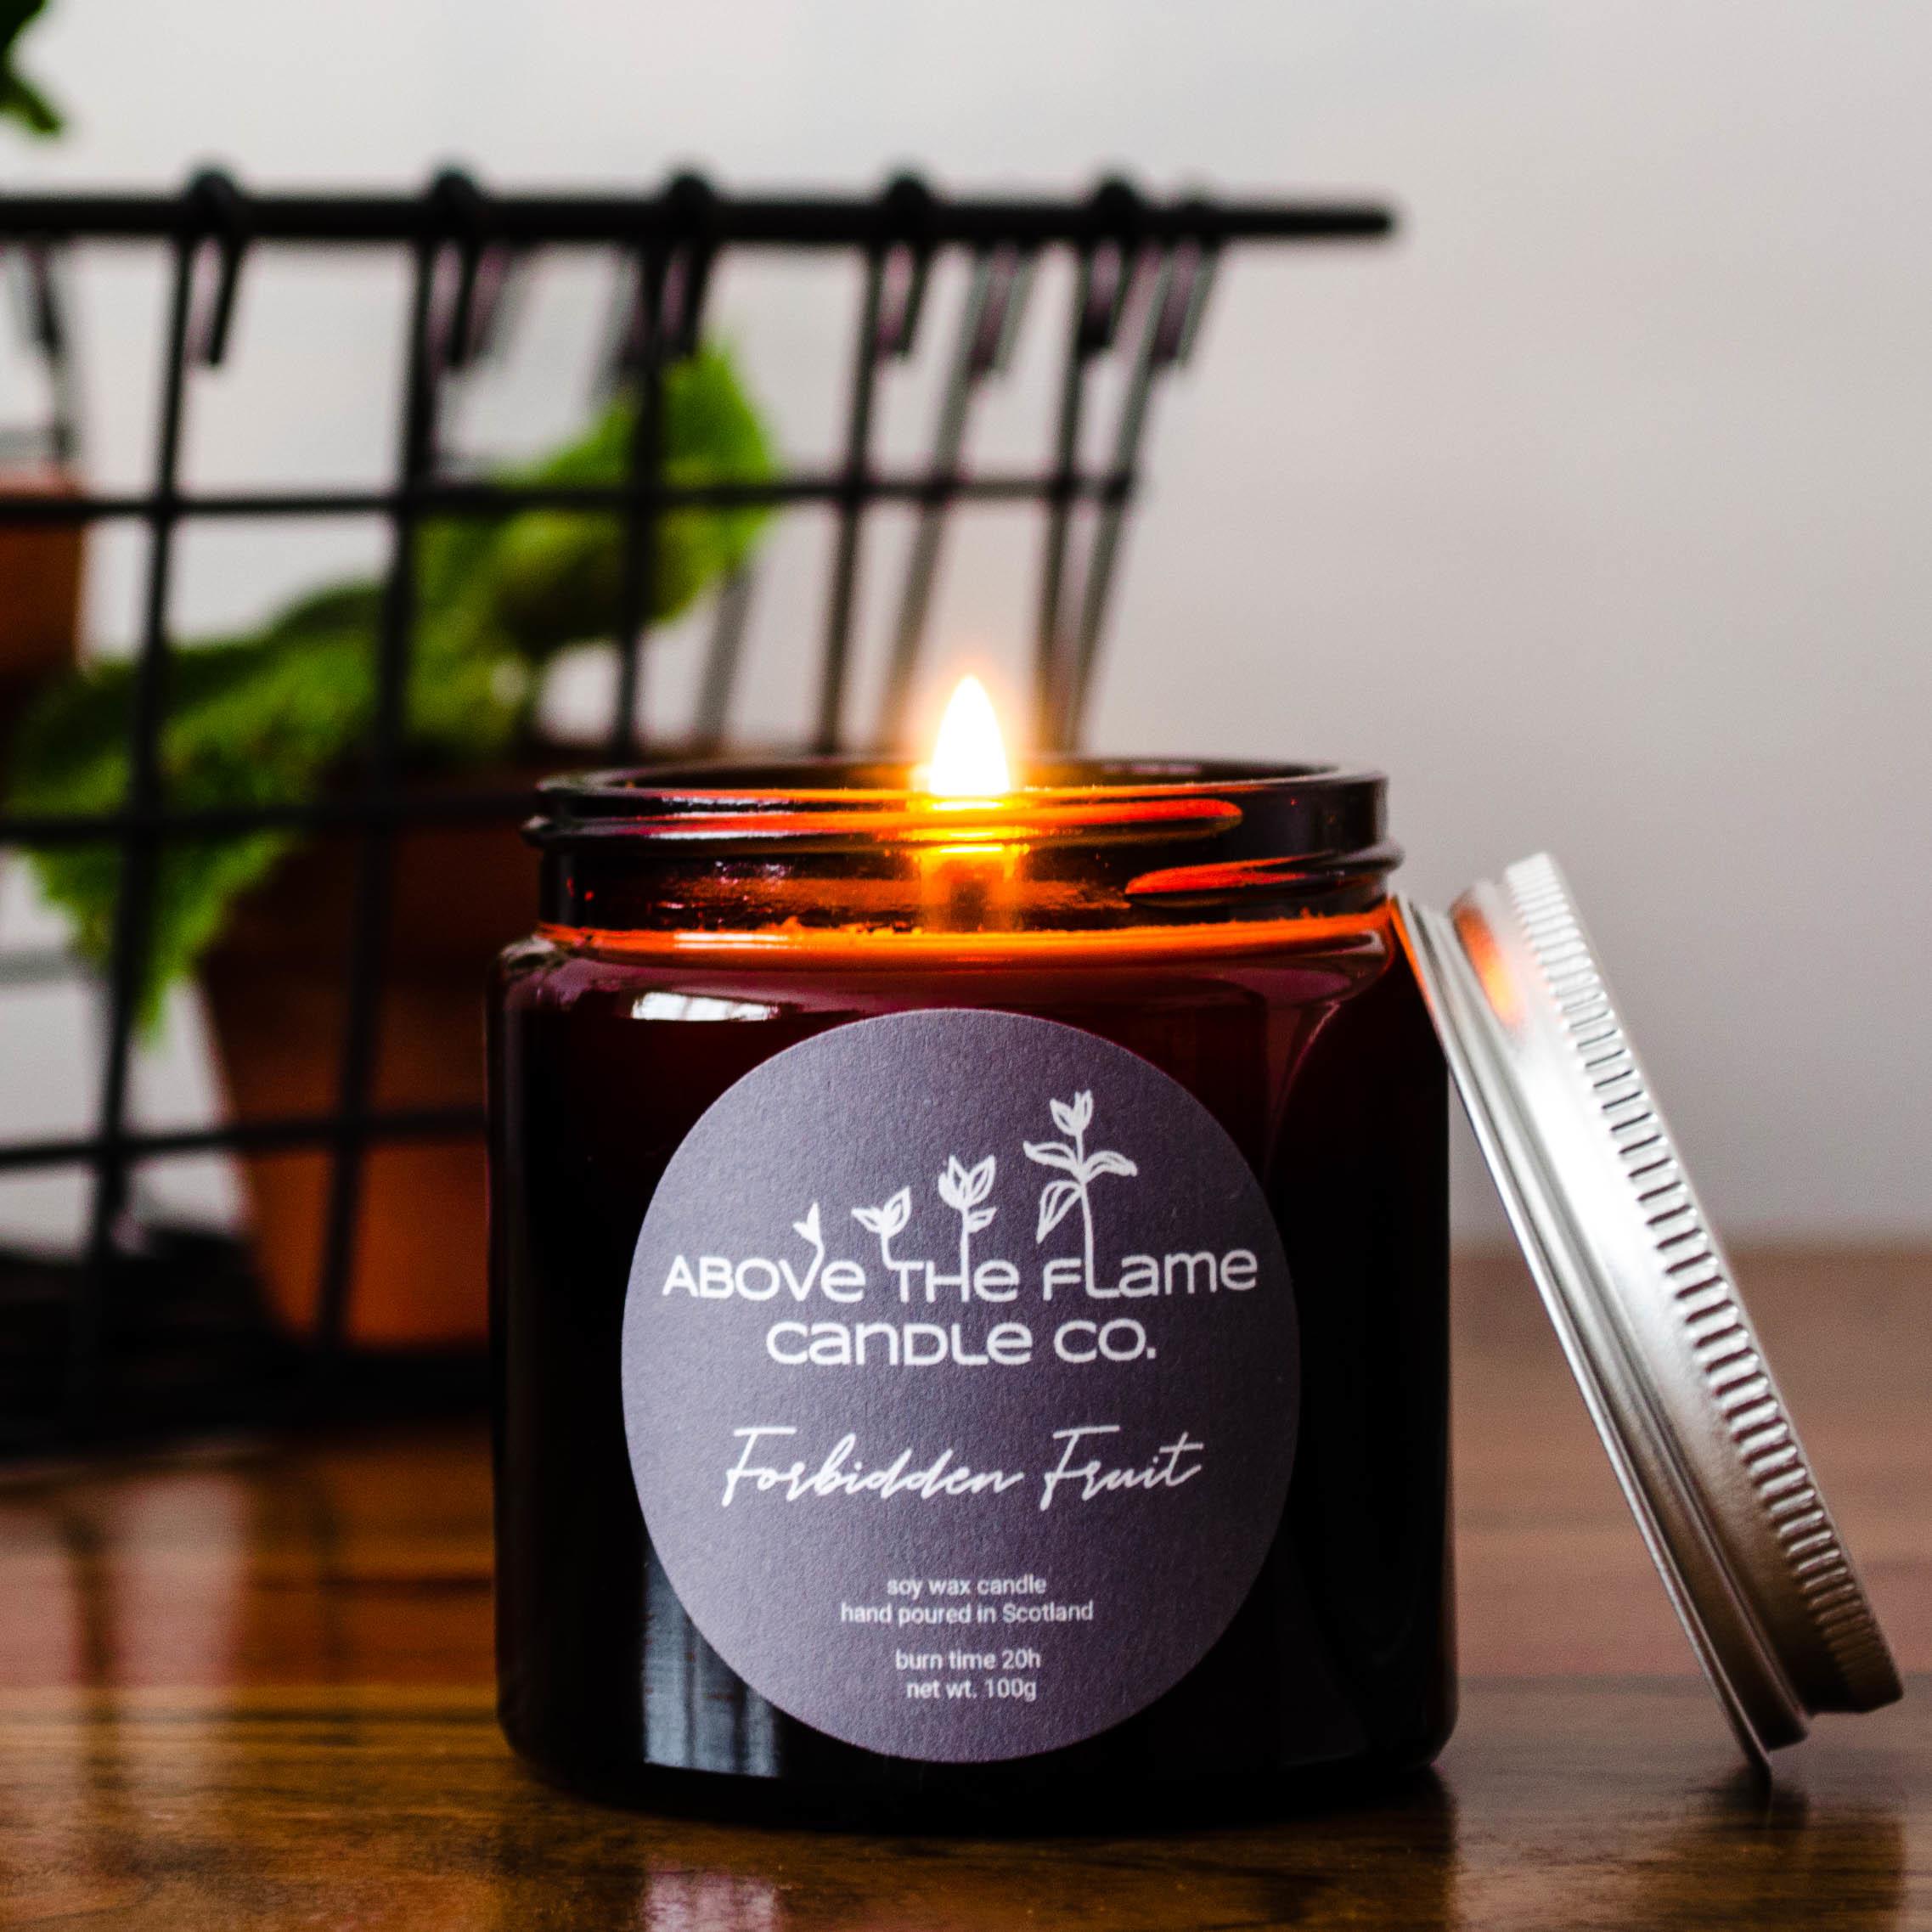 A lit forbidden fruit amber soy wax candle jar handmade by above the flame candle Co on a wooden table